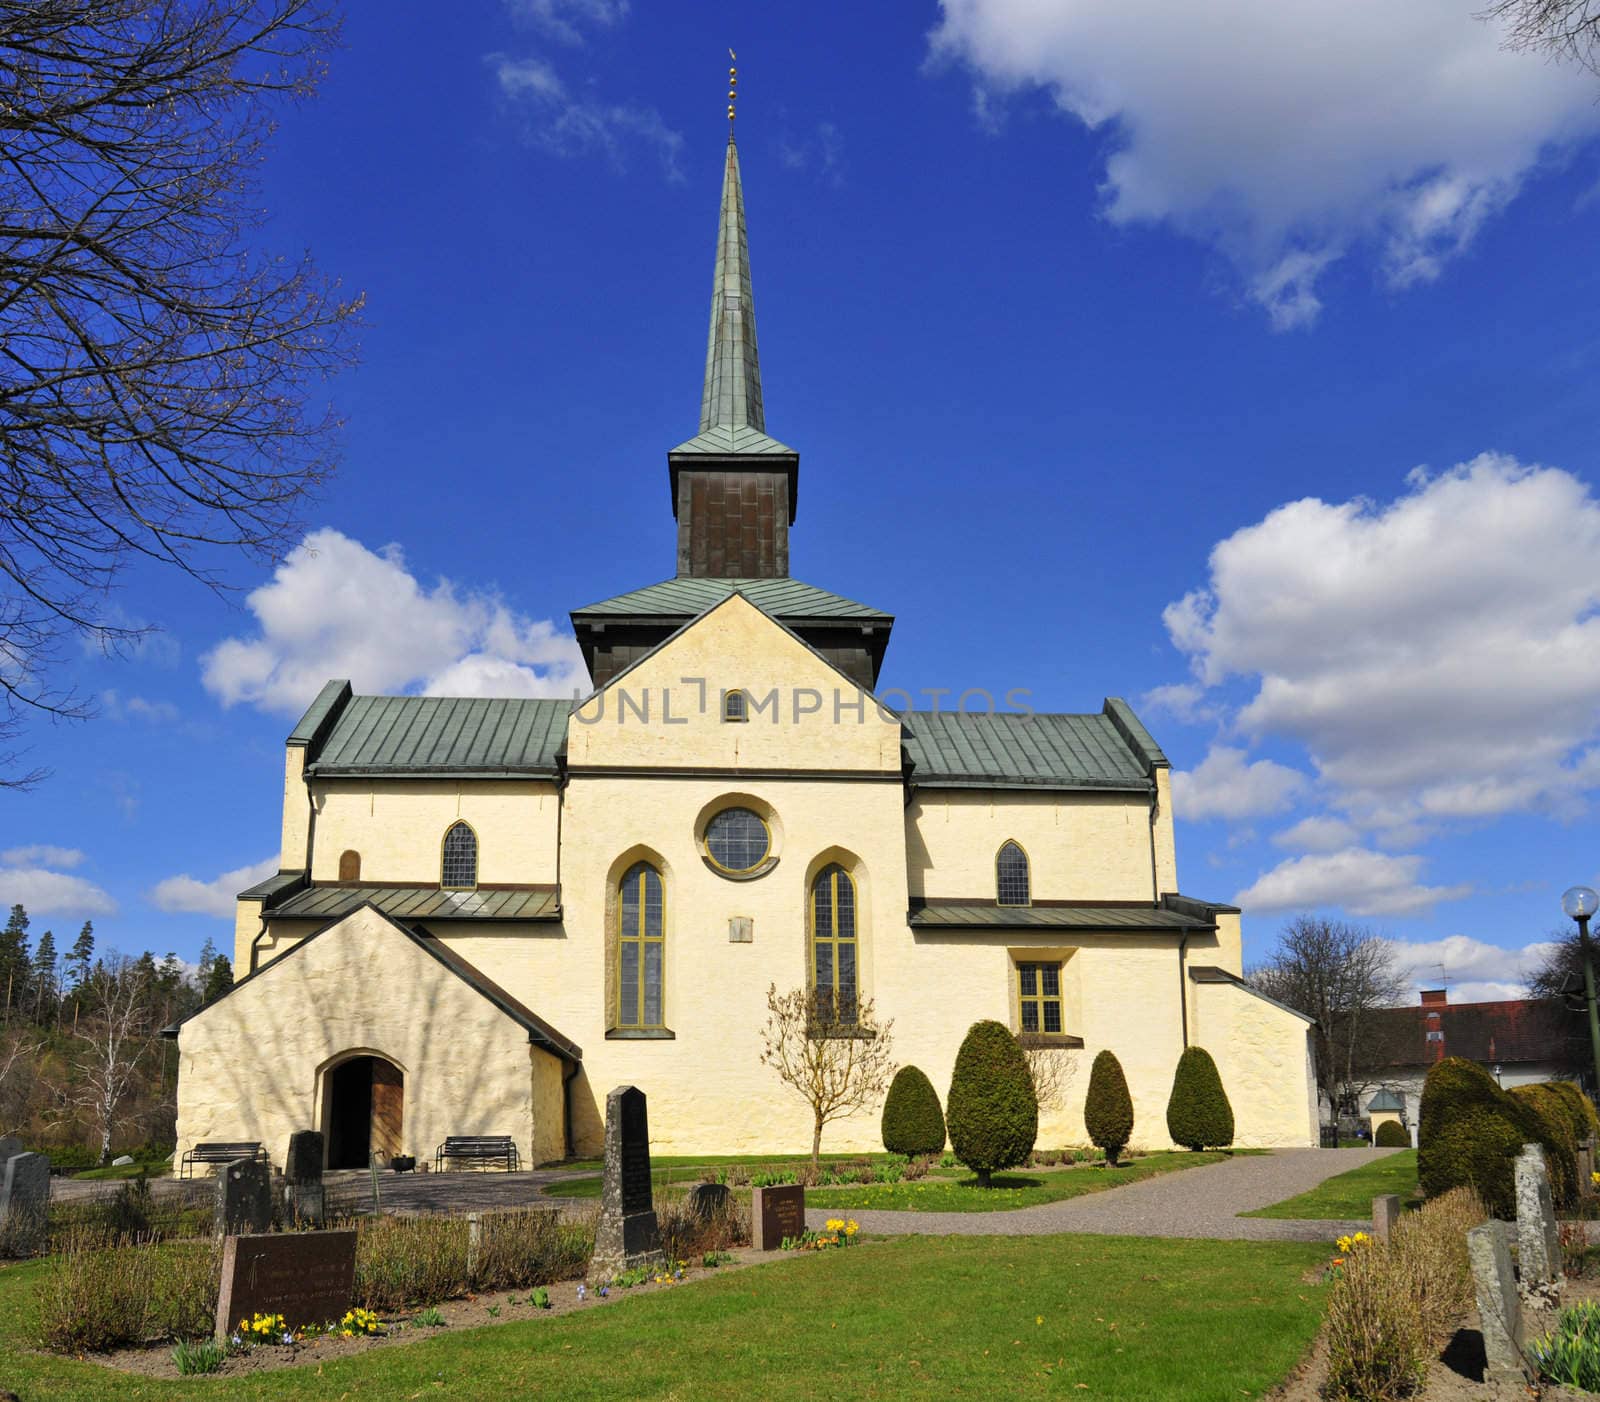 Beautiful Swedish church with perfect blue sky and white clouds